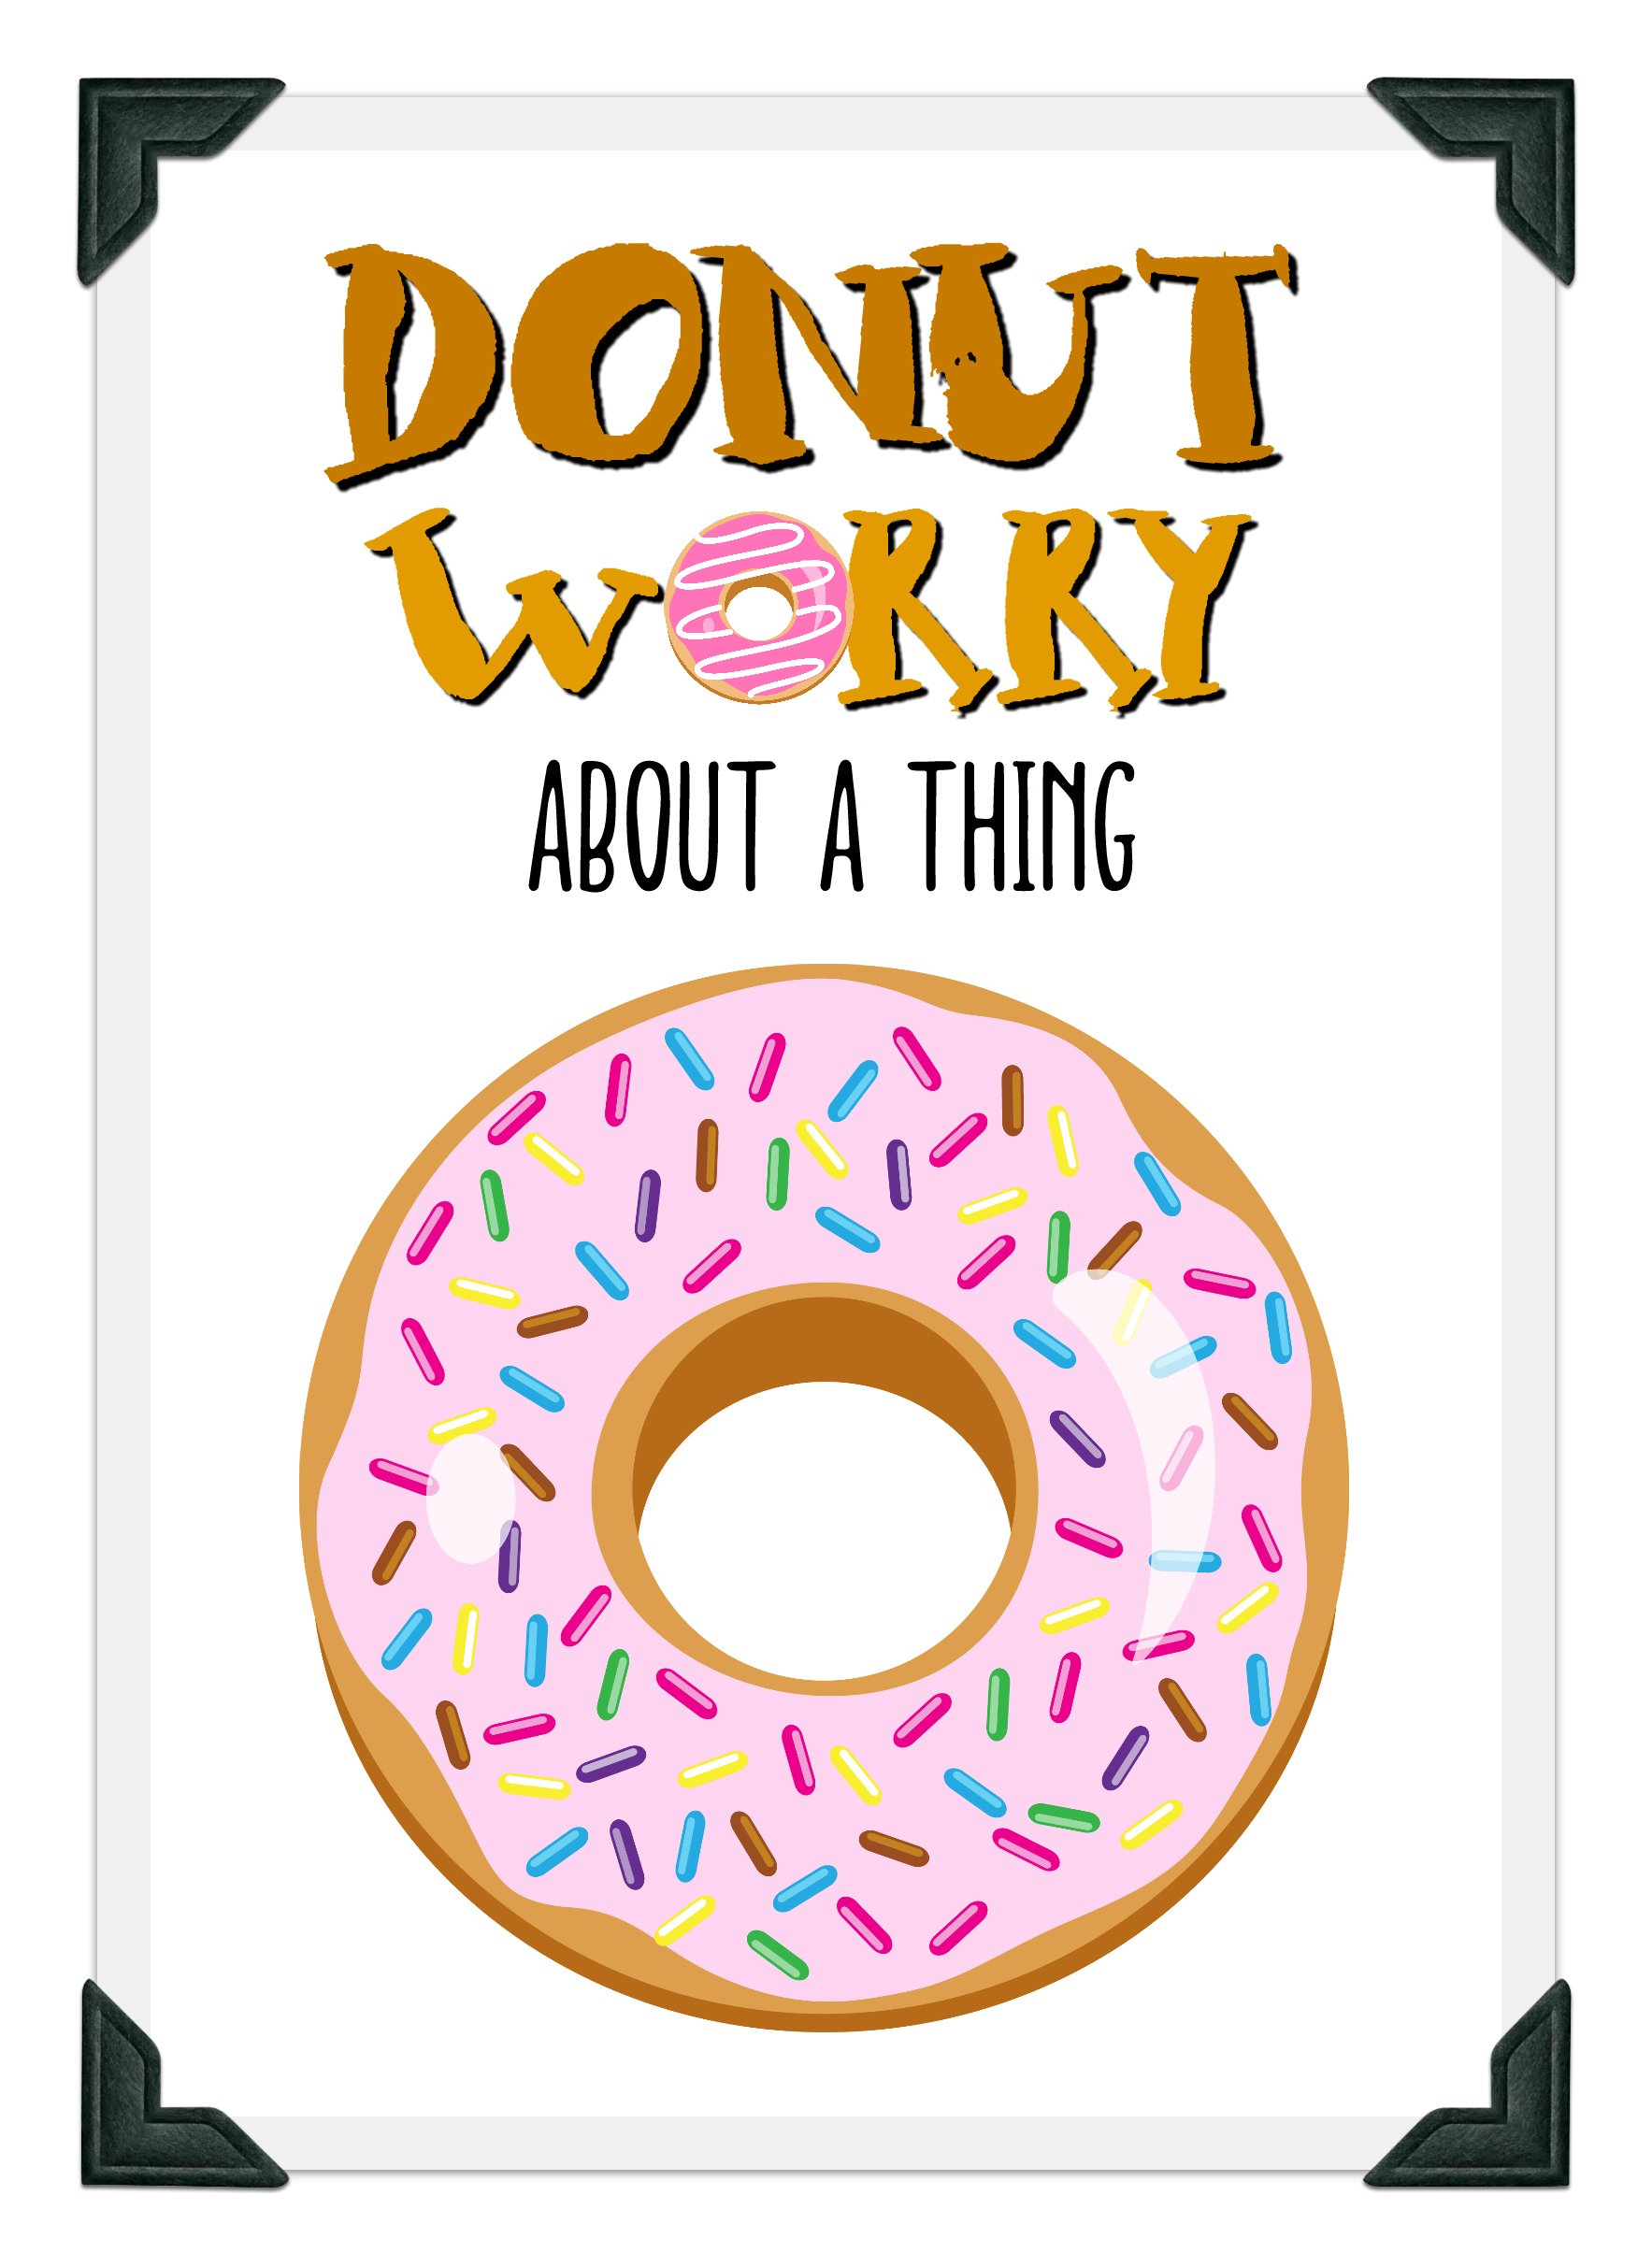 Donut worry about a thing